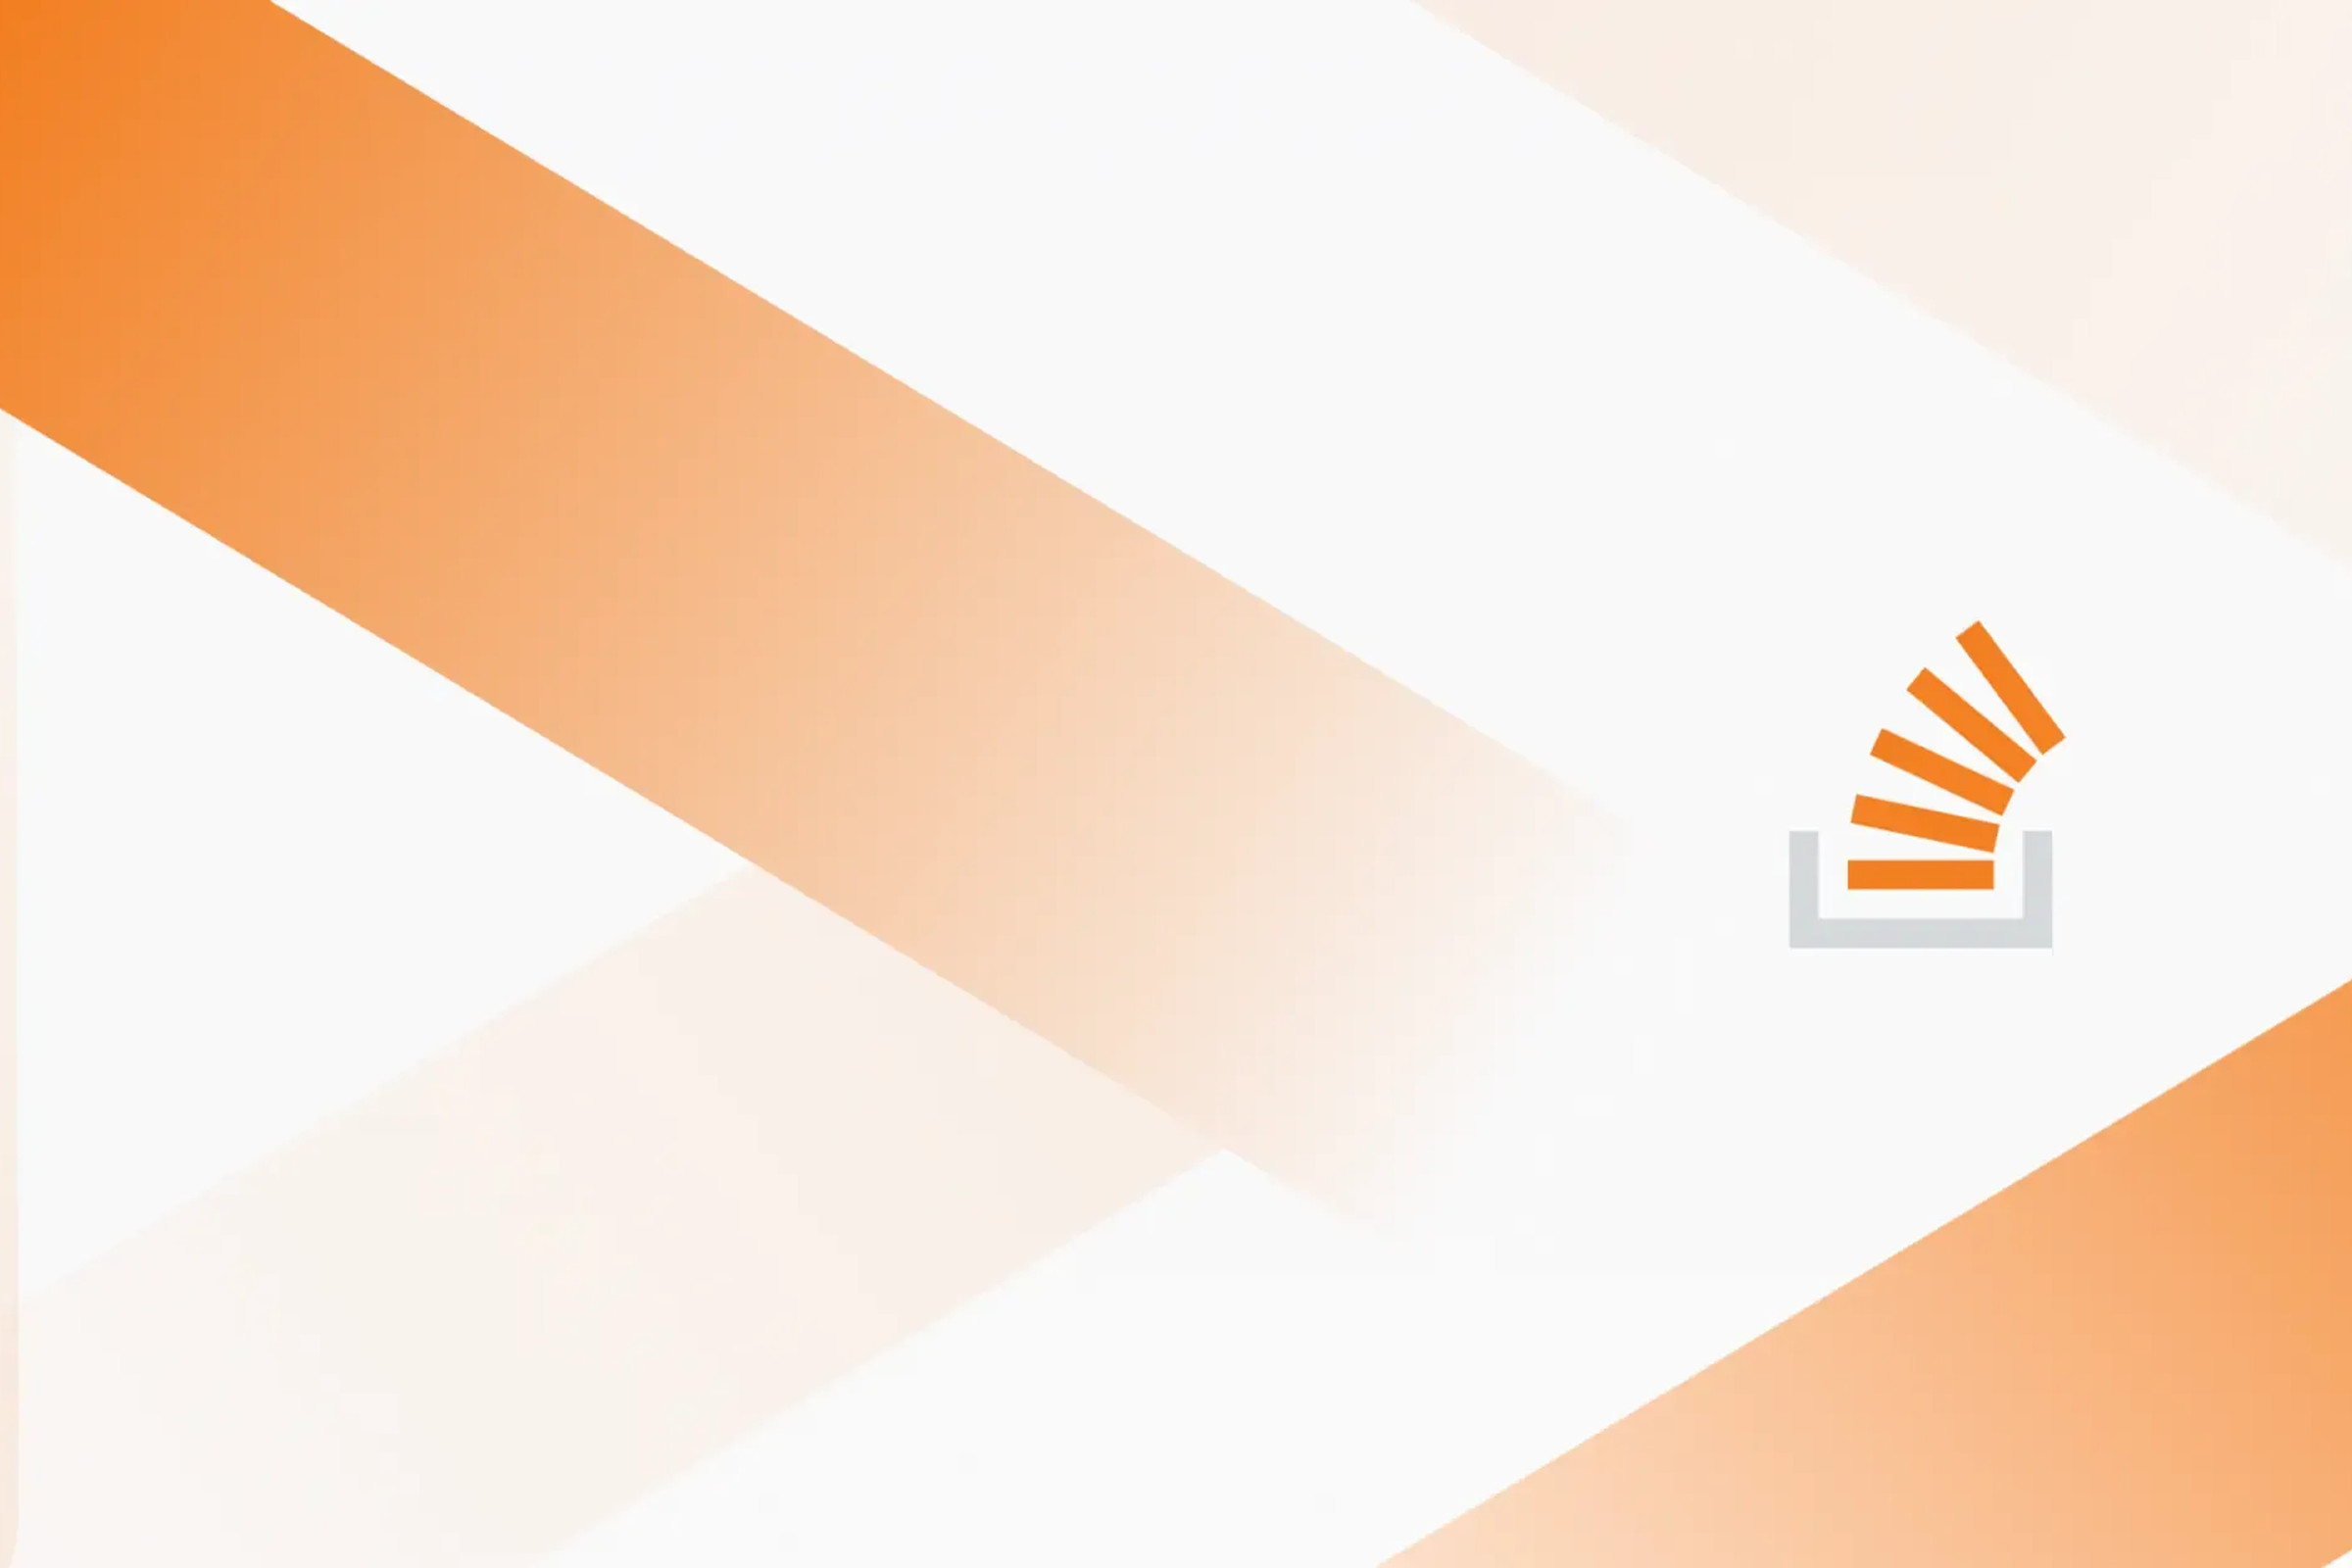 A Stack Overflow graphic with the company’s logo and large bars colored in with orange gradients cutting diagonally across it.